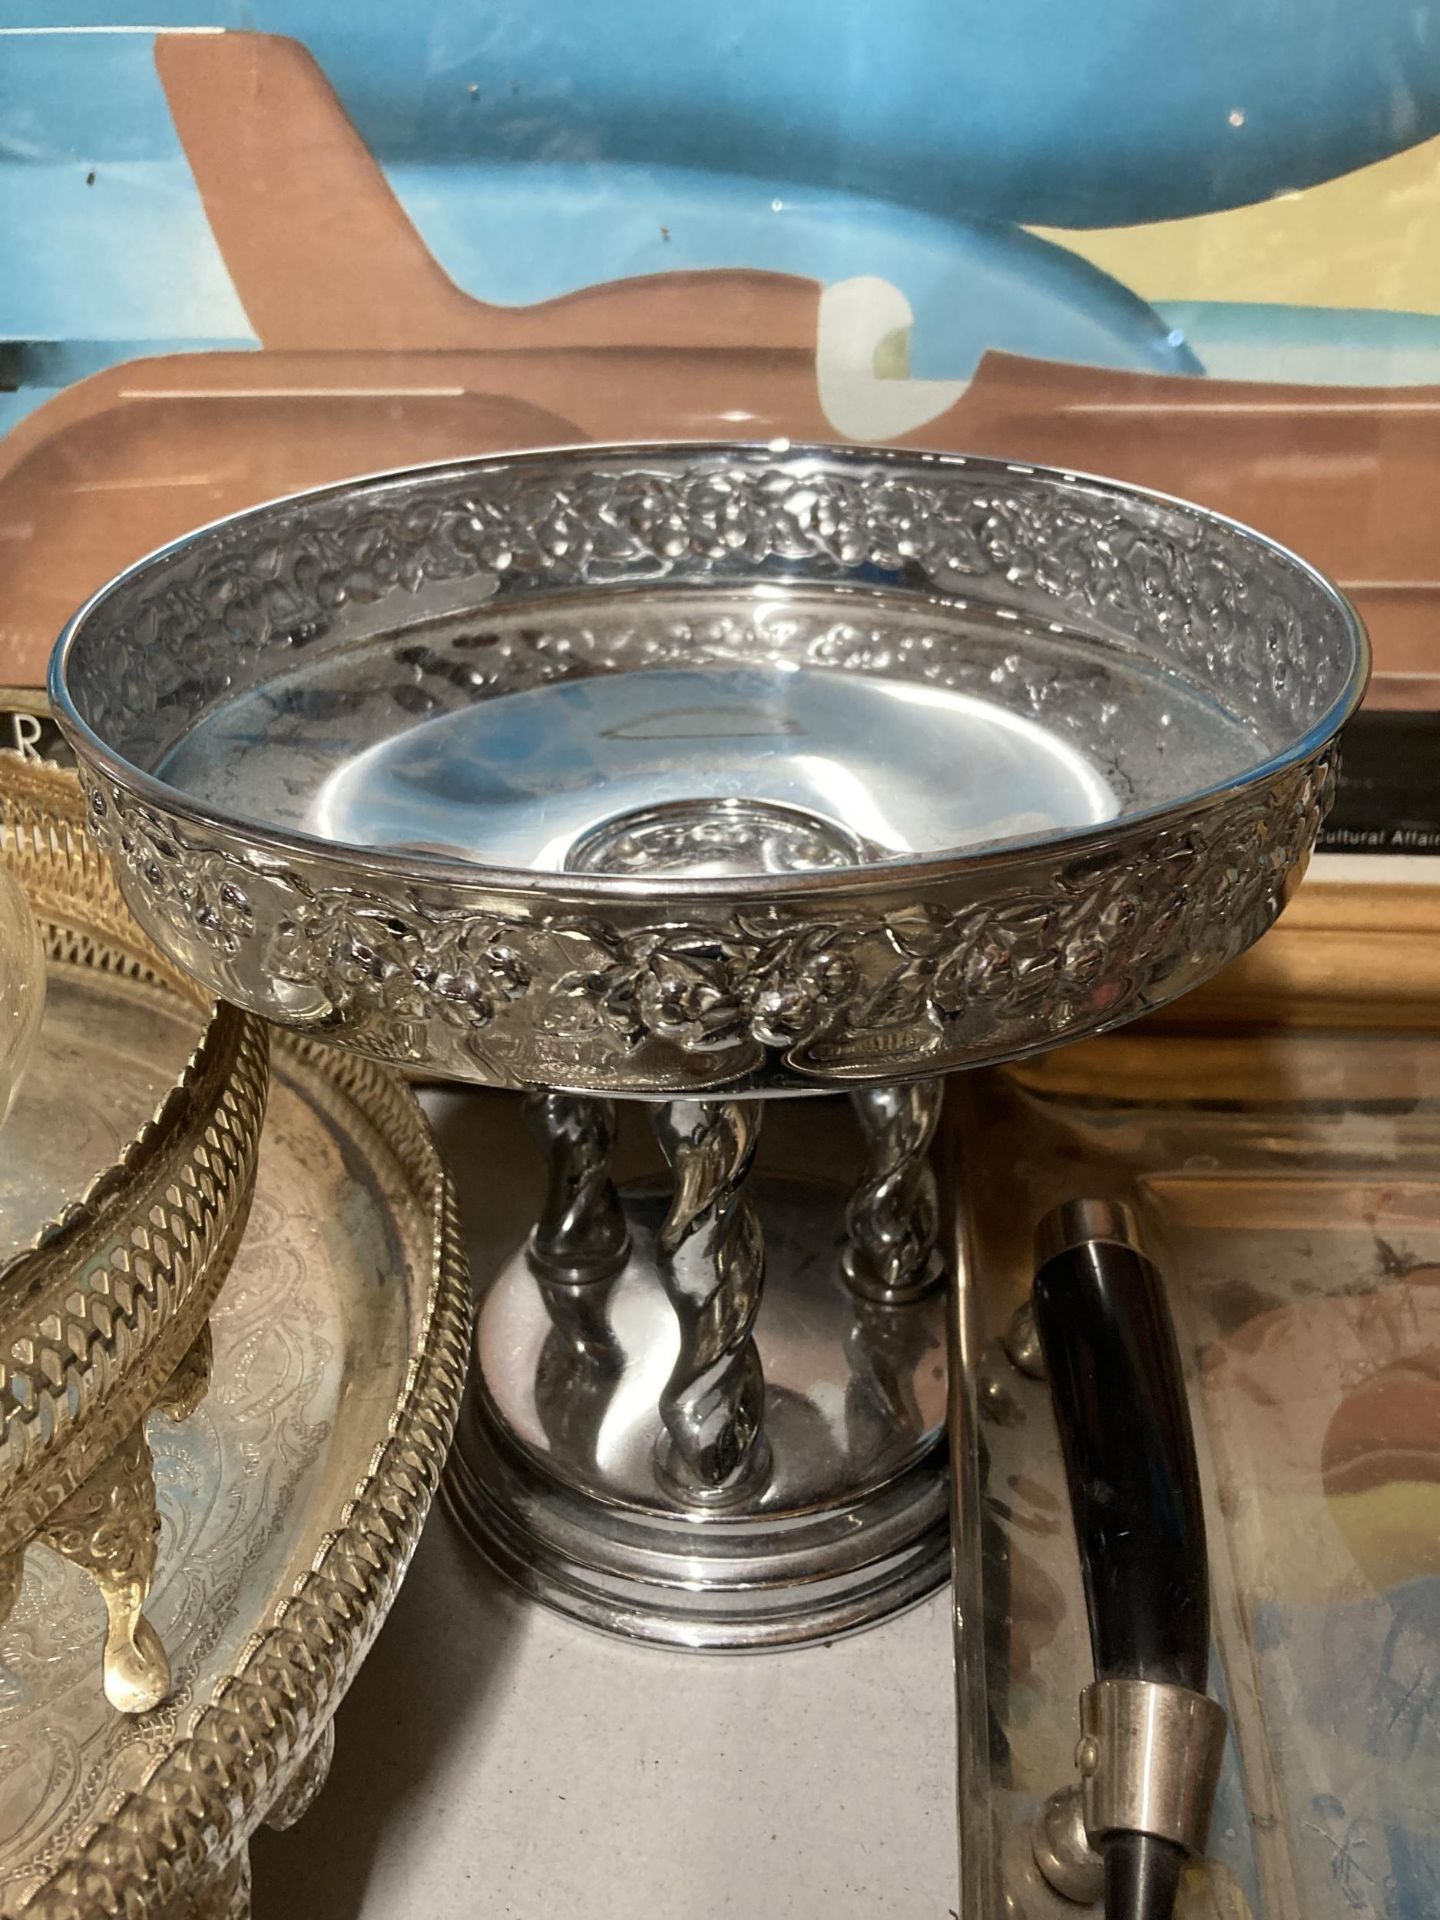 A LARGE LOT OF SILVER PLATED ITEMS, DRINKS AND SERVING TRAYS ETC - Image 2 of 6